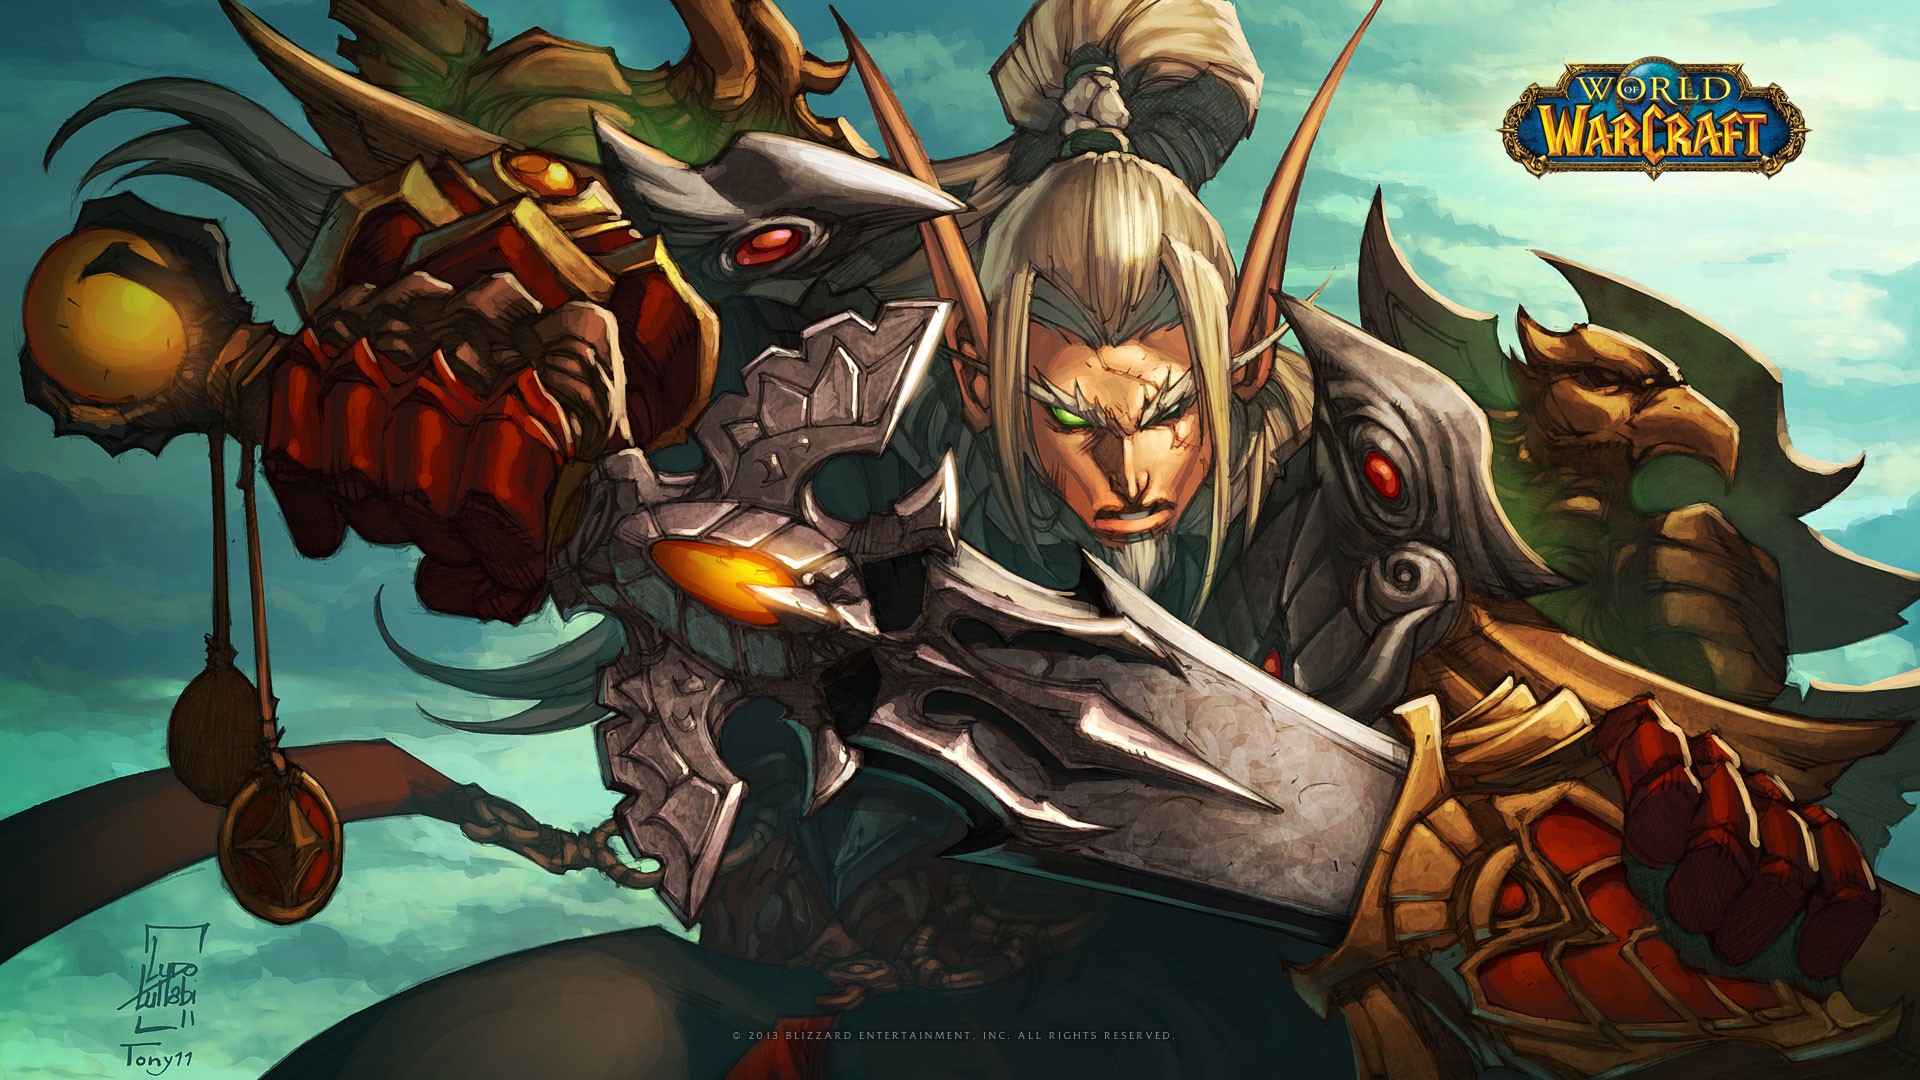 General 1920x1080 World of Warcraft 2013 (Year) Blizzard Entertainment fantasy art PC gaming